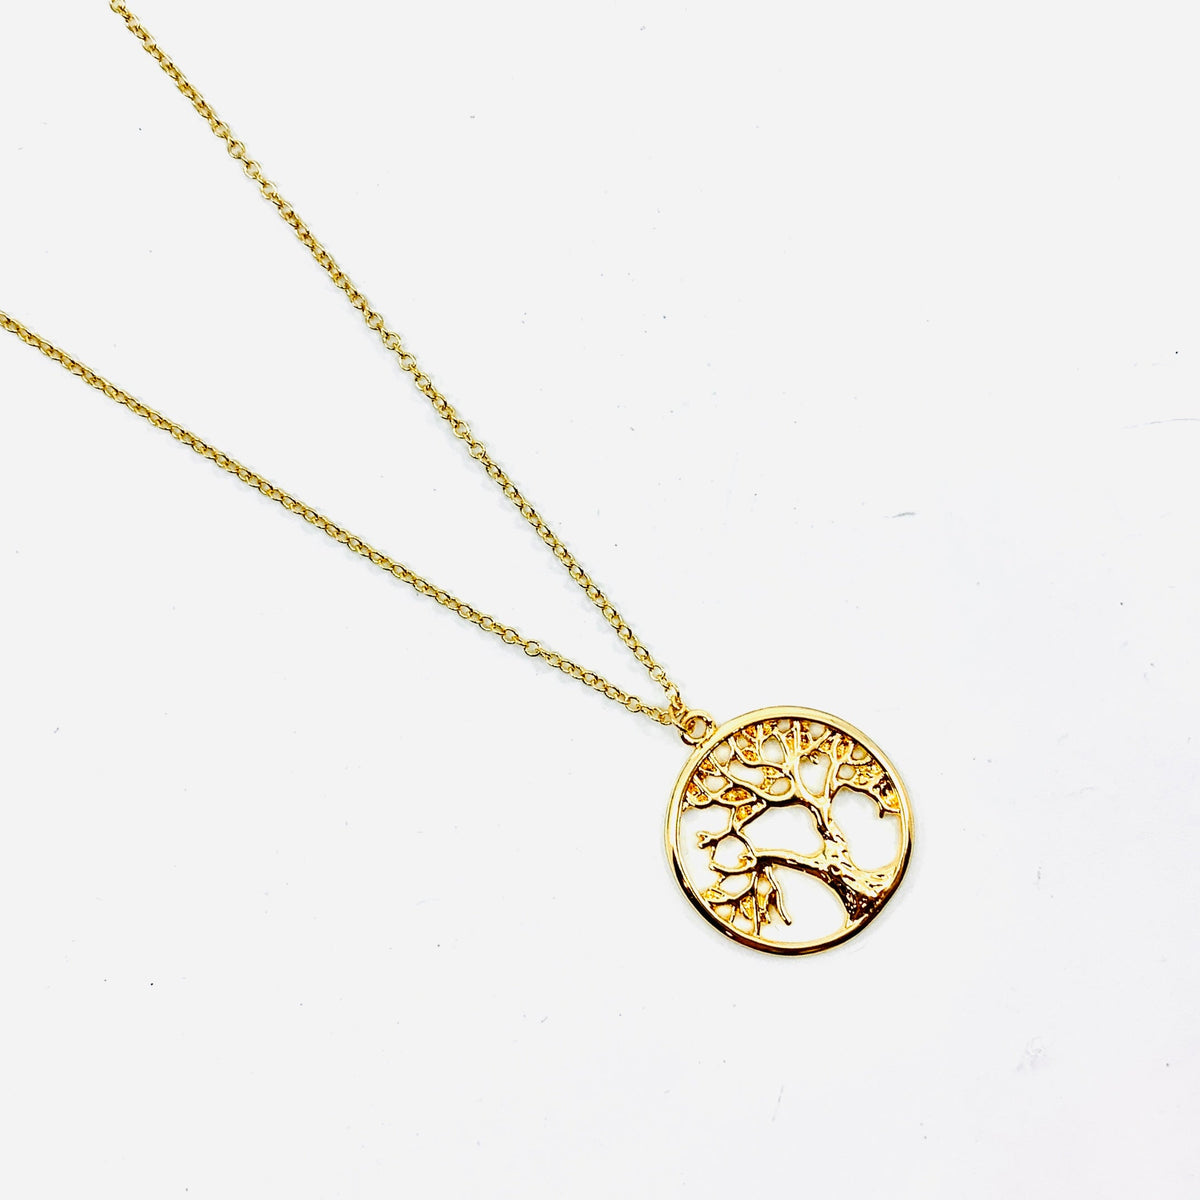 Tree of Life Gold Pendant Necklace Jewelry - 